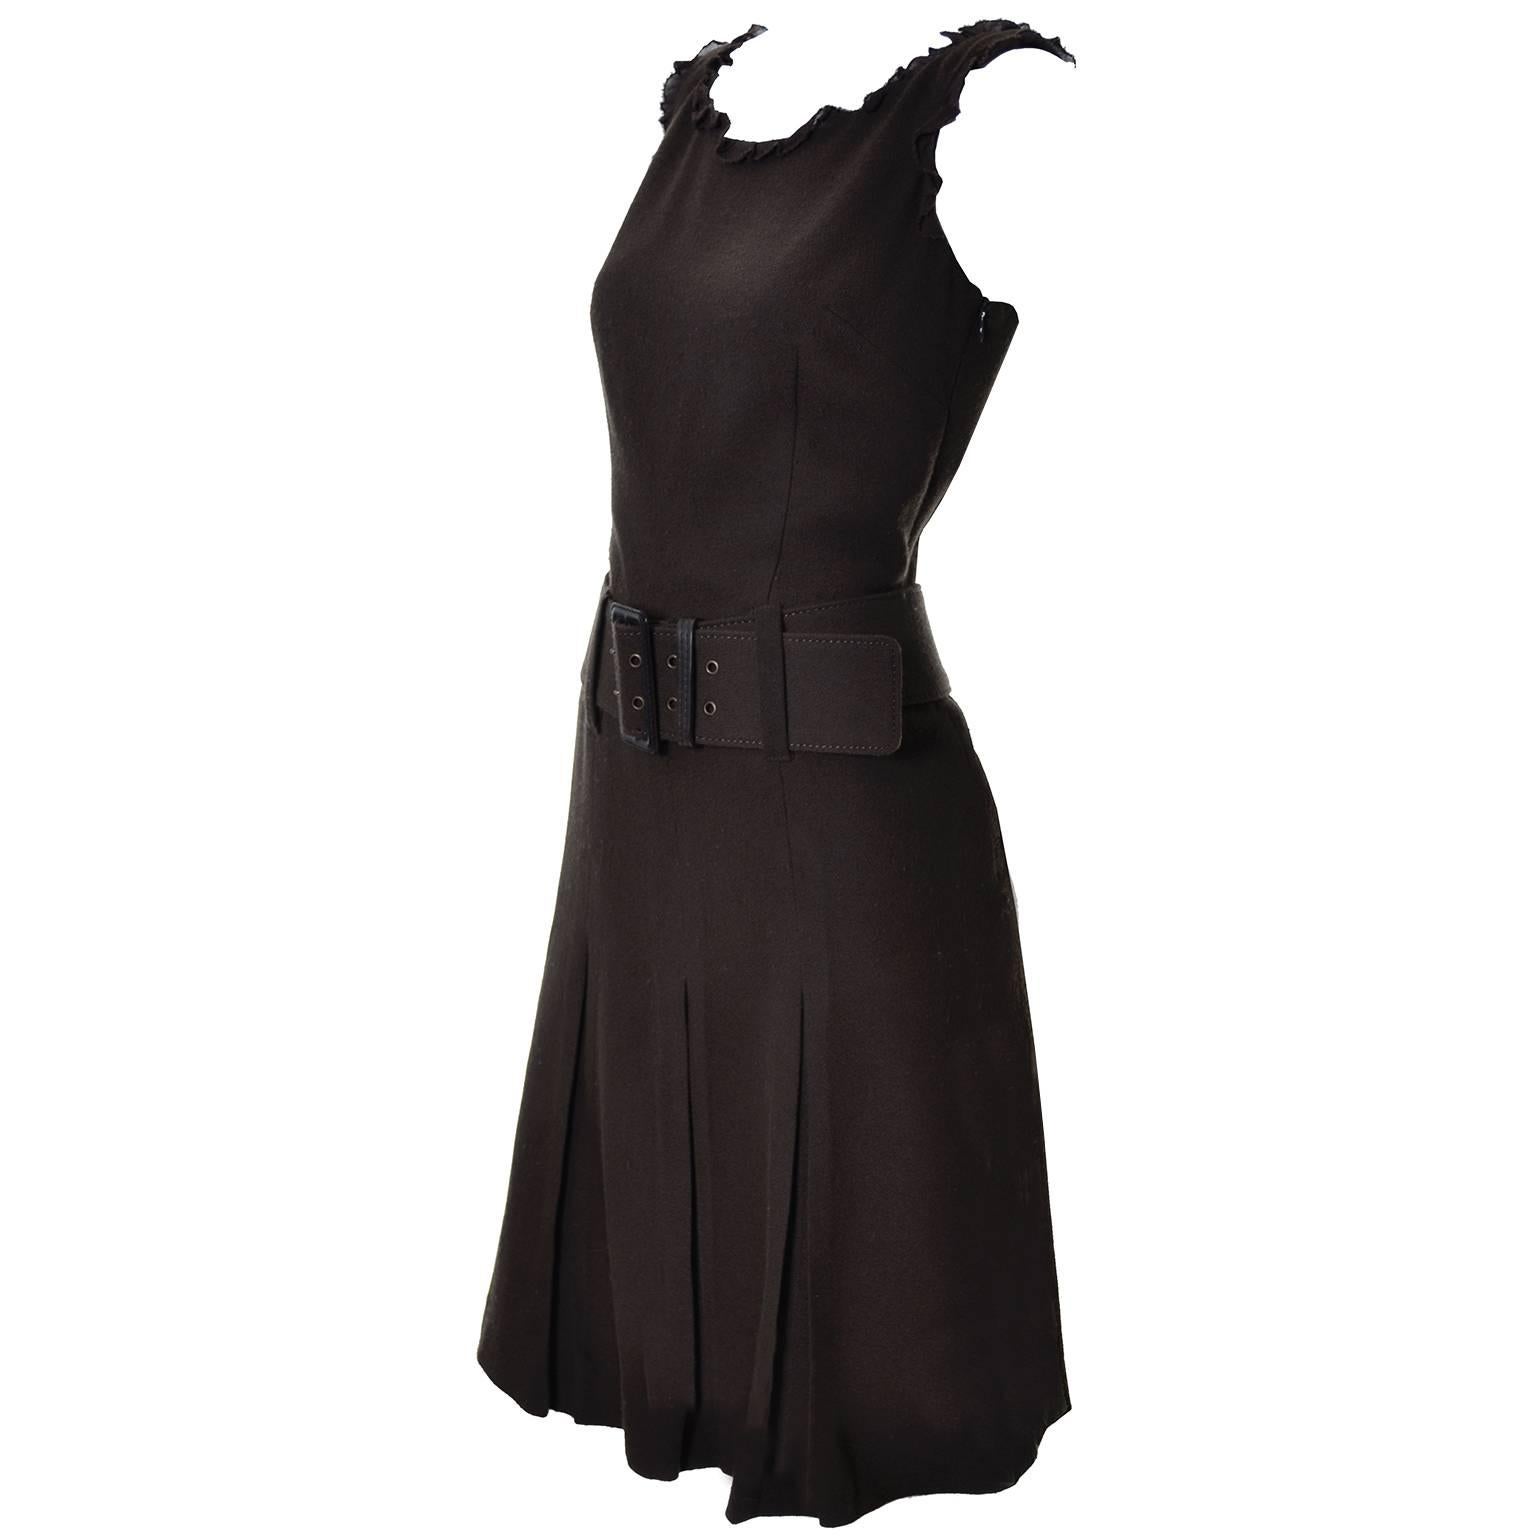 This sleeveless brown wool dress from Moschino Cheap and Chic has a great wide belt and pleated skirt.  The arm holes and neck are trimmed with brown opaque organza ruffle and the dress is fully lined.  You could wear a turtleneck under this dress